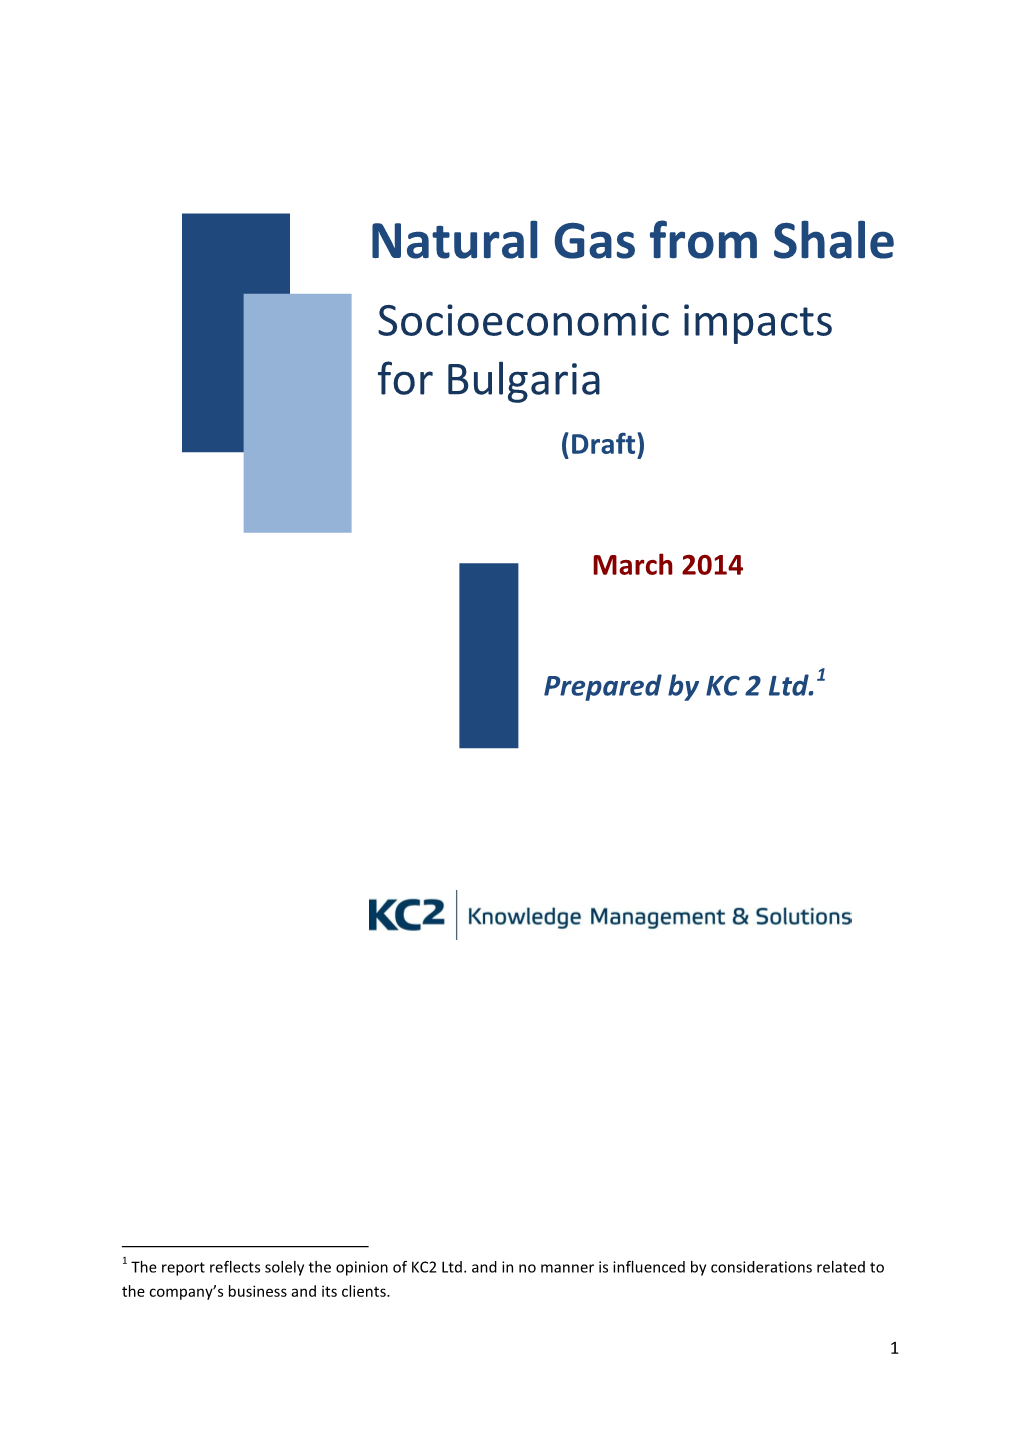 Natural Gas from Shale Socioeconomic Impacts for Bulgaria (Draft)